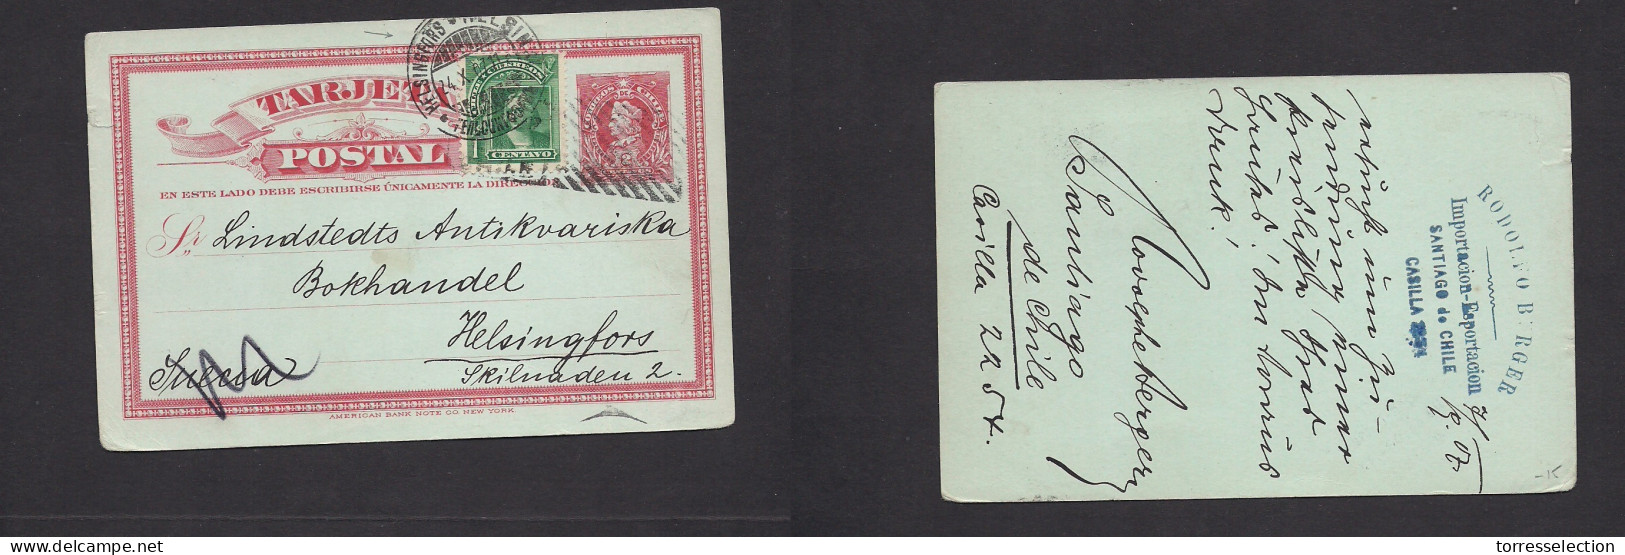 CHILE - Stationery. 1907 (7 Sept) Santiago - Tyuland (24 Oct) Helsingfors. 2c Red Stat Card + 1c Green Adtl. Arrival Cac - Chili